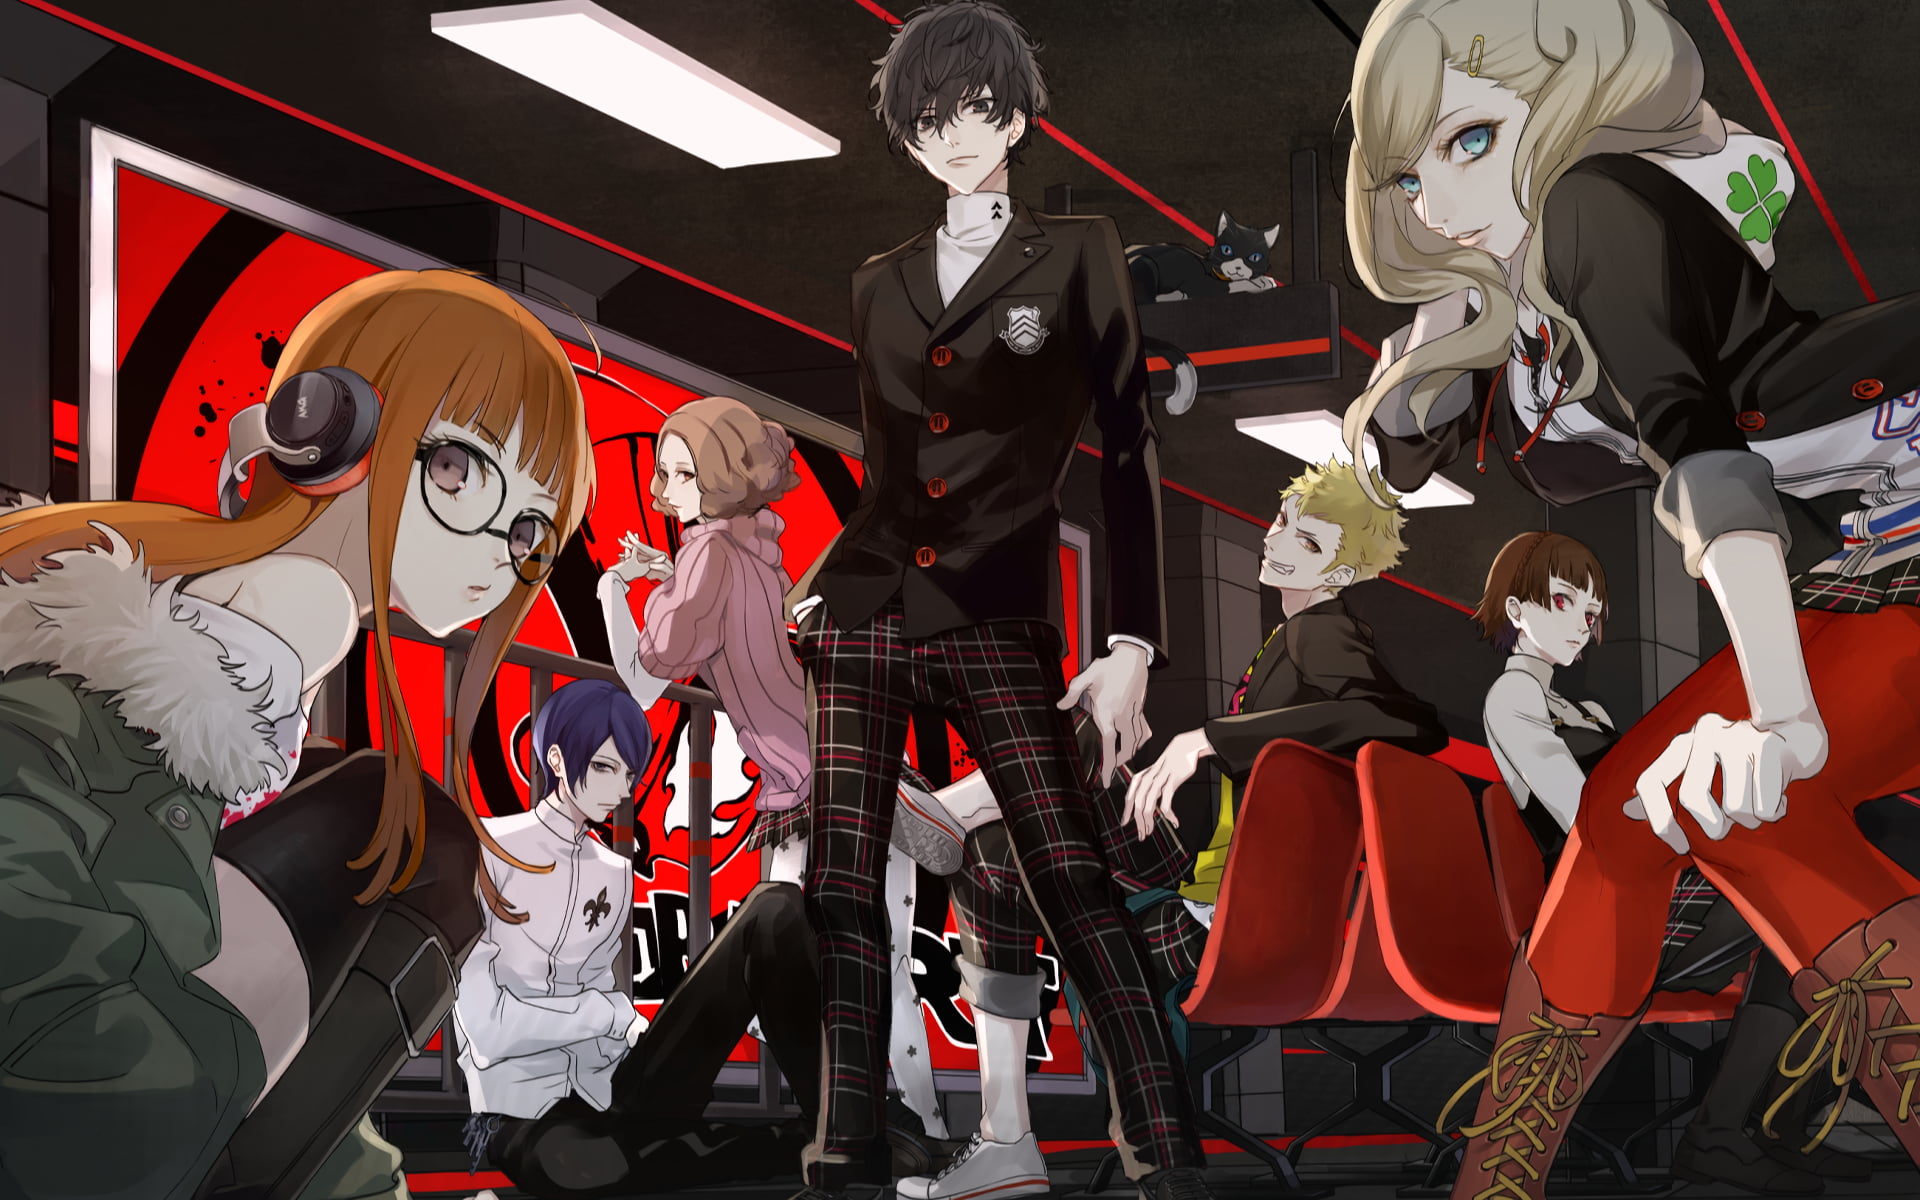 Group of people anime character wallpaper, Persona 5, Persona series ...